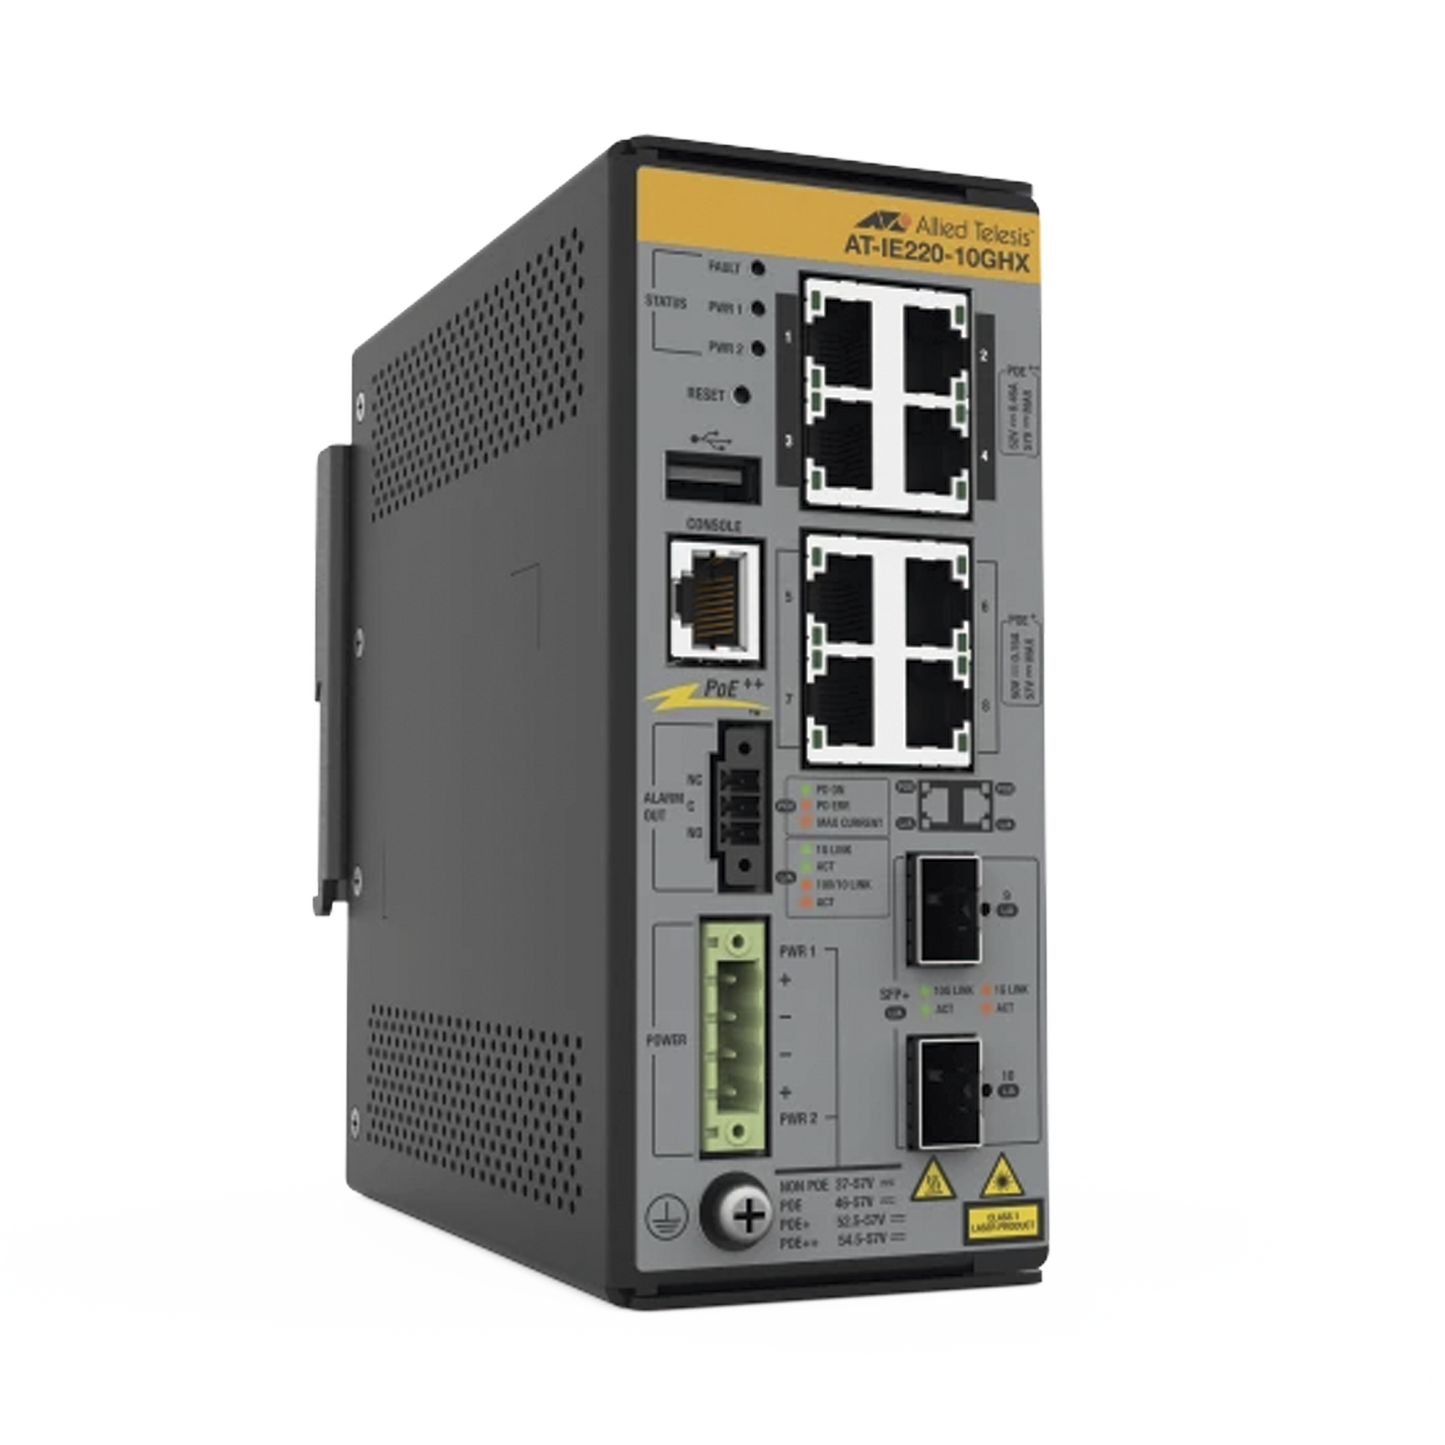 8x 10/100/1000T, 2x 1G/10G SFP+, Industrial Ethernet, Layer 2+ Switch, PoE++